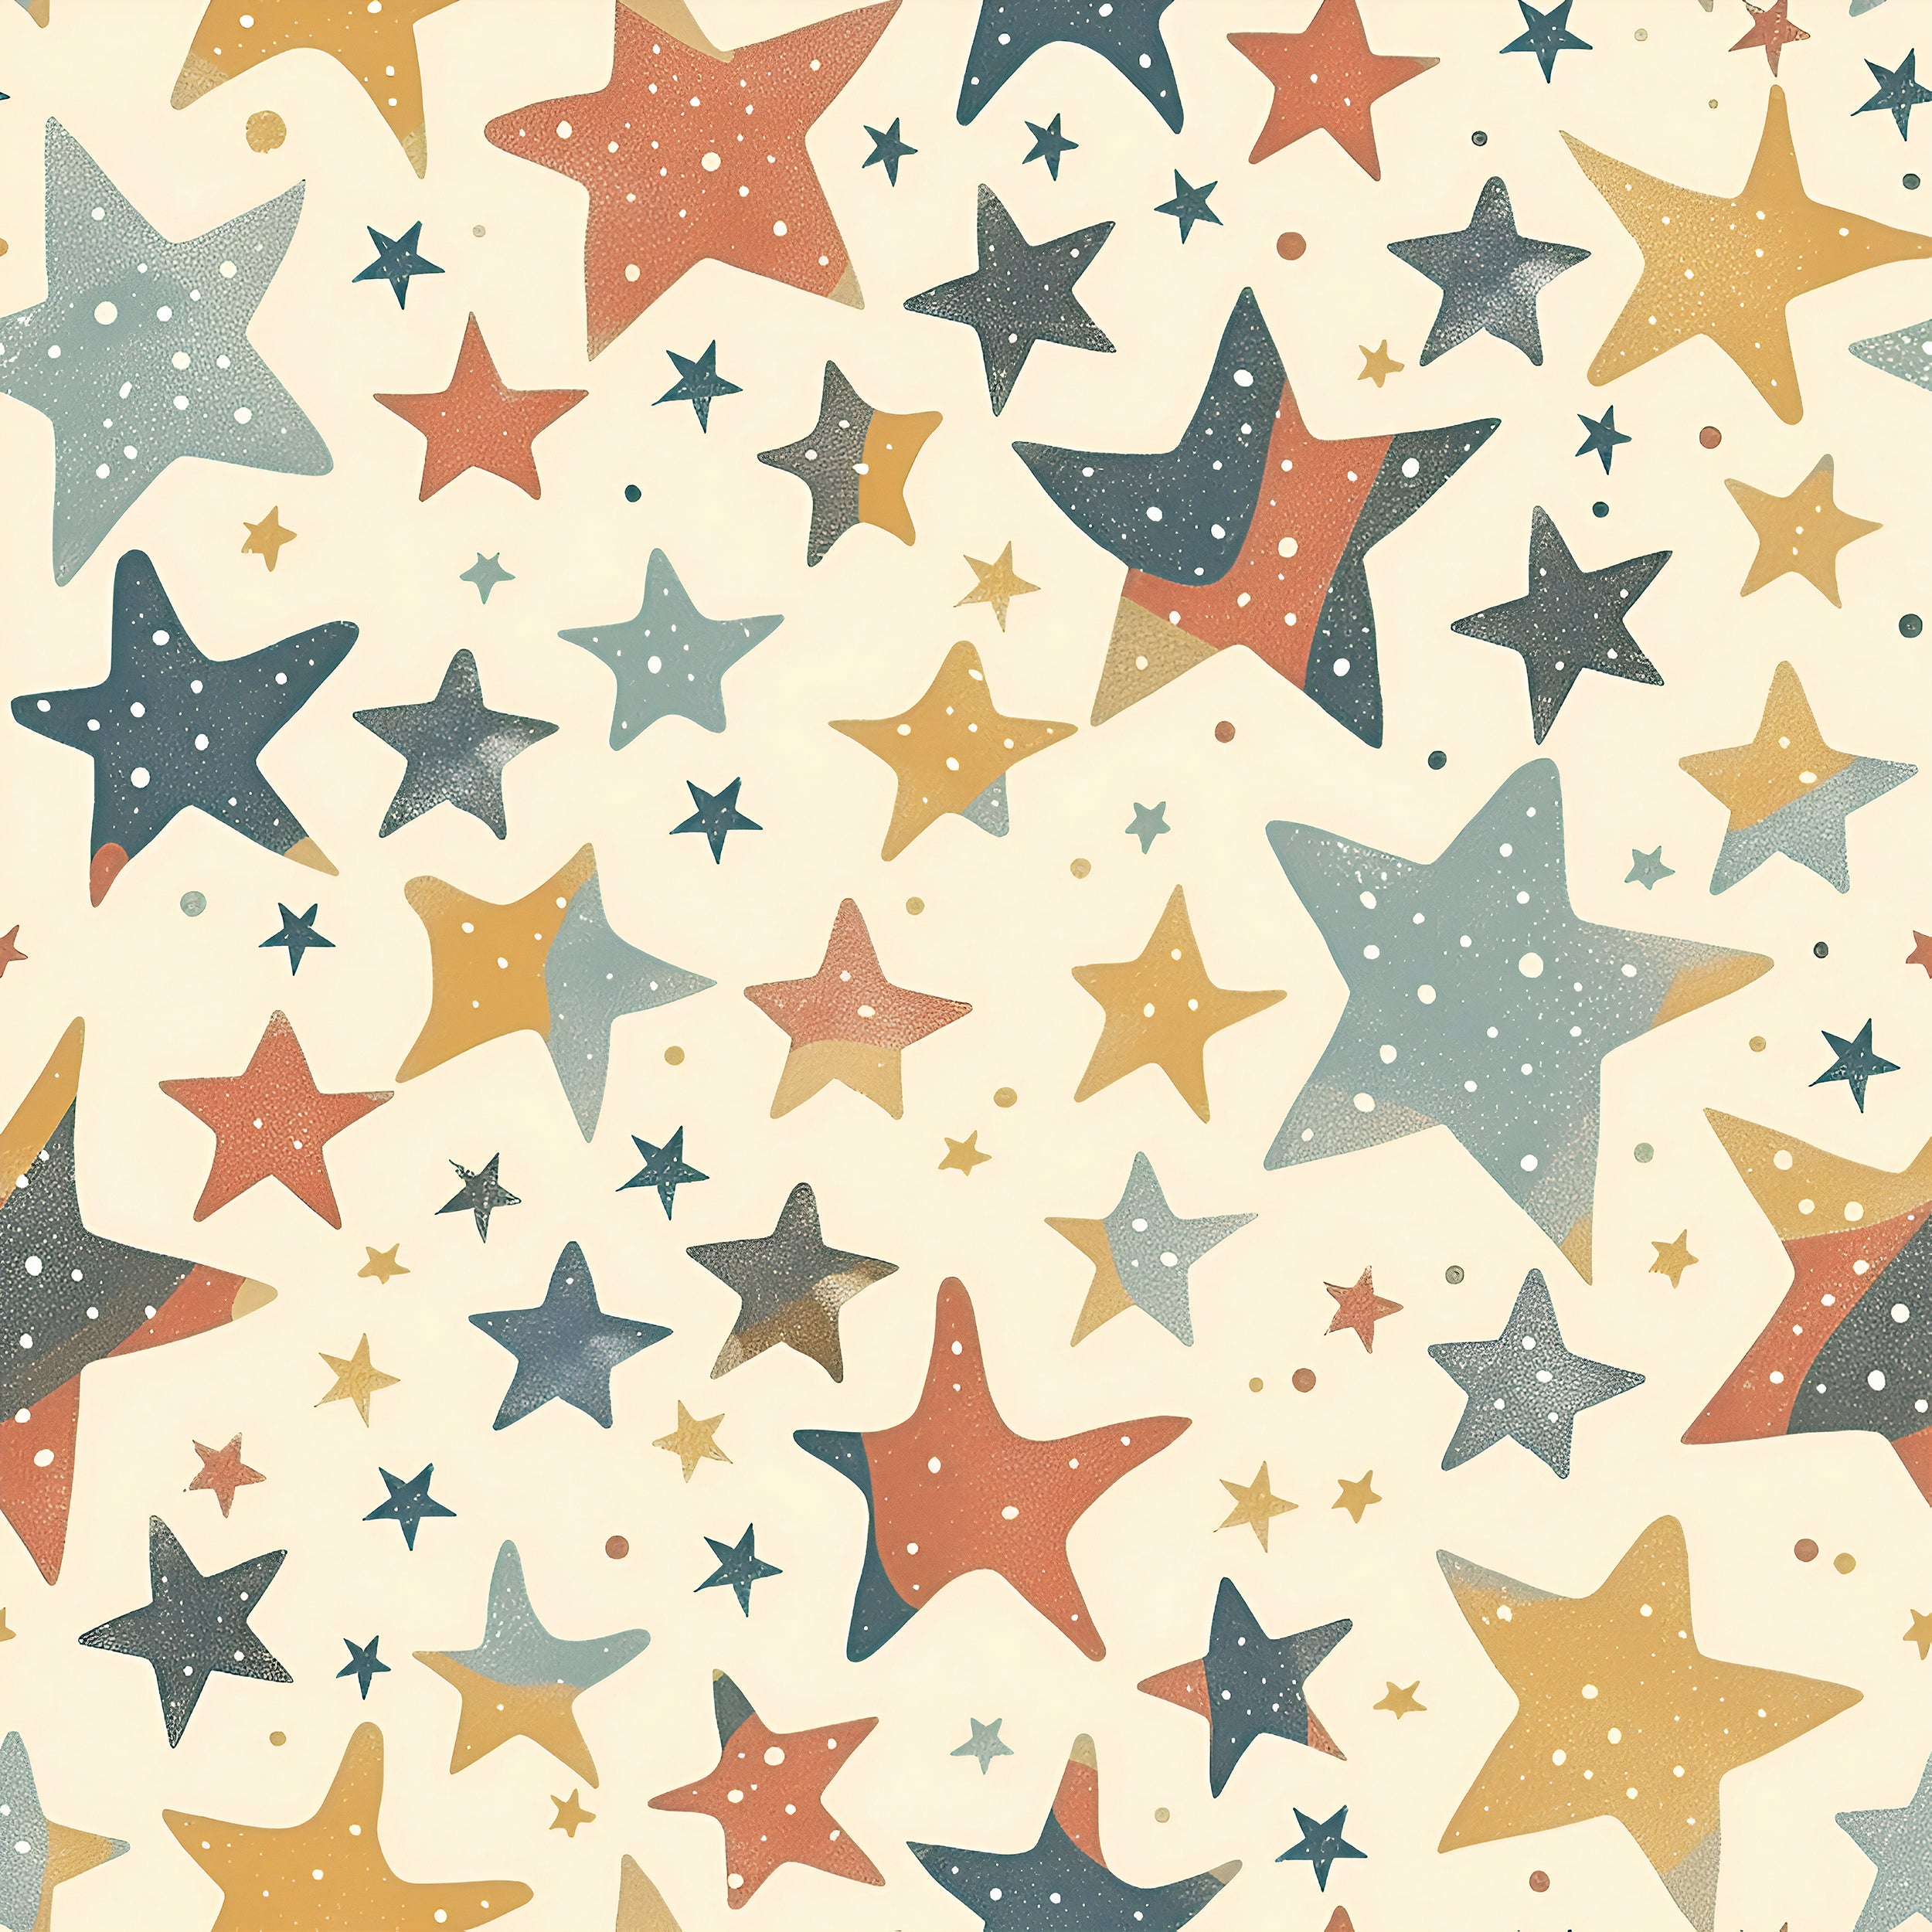 Small and Large Stars Wallpaper, Multicolor Kids Room Stars Wall Decor, Self-adhesive Starry Wallpaper, Beige Nursery Star Pattern Decal